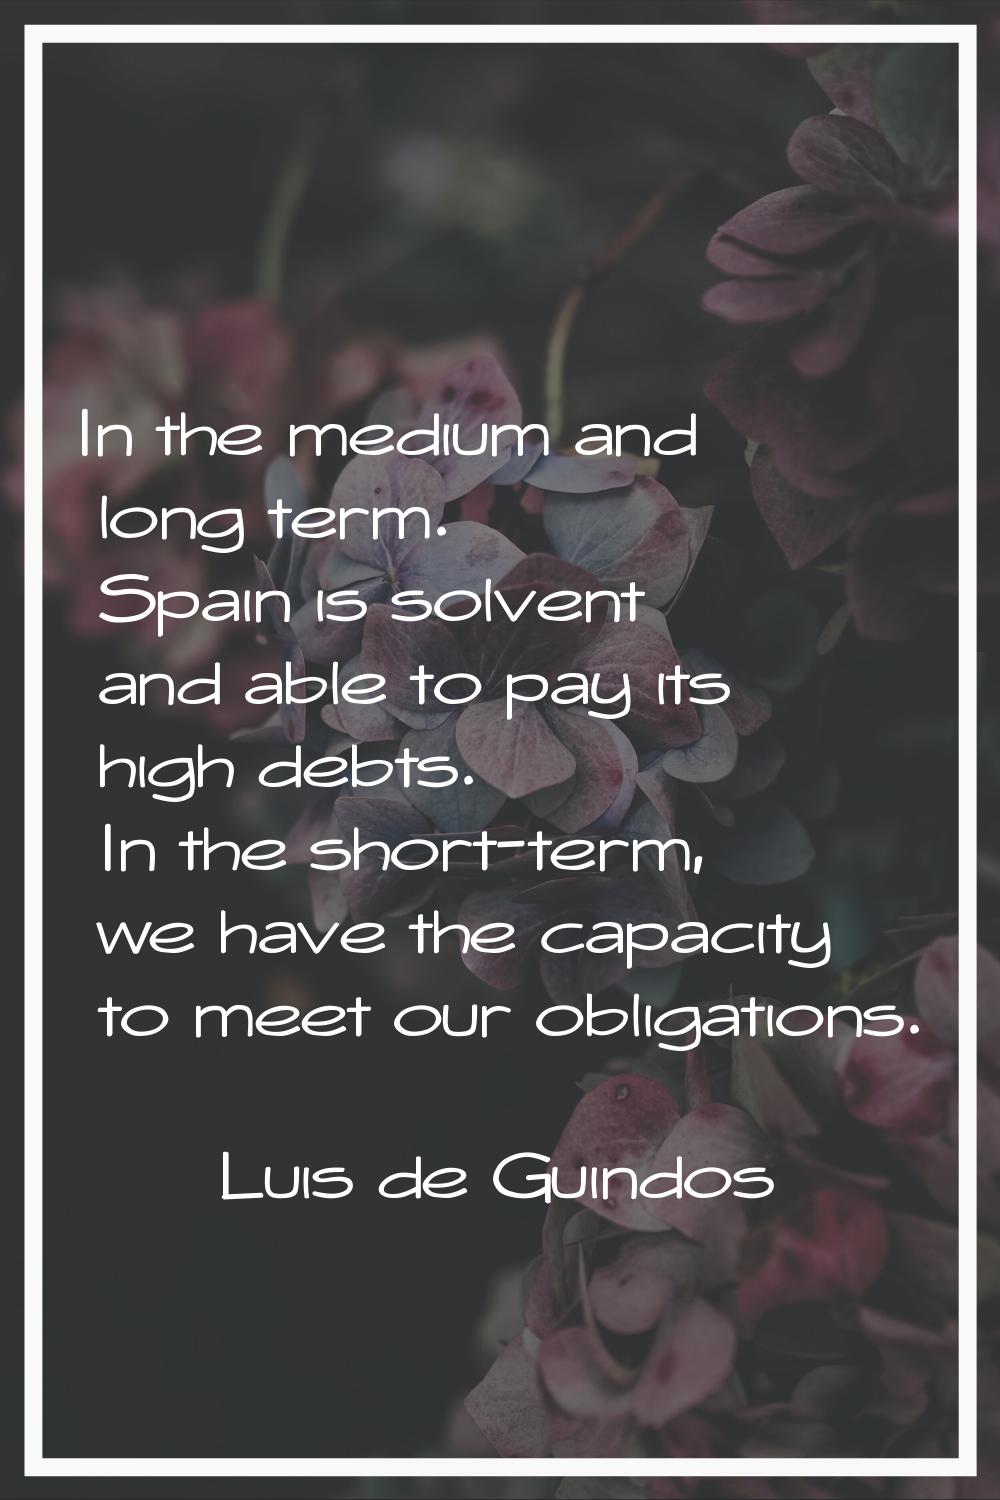 In the medium and long term. Spain is solvent and able to pay its high debts. In the short-term, we